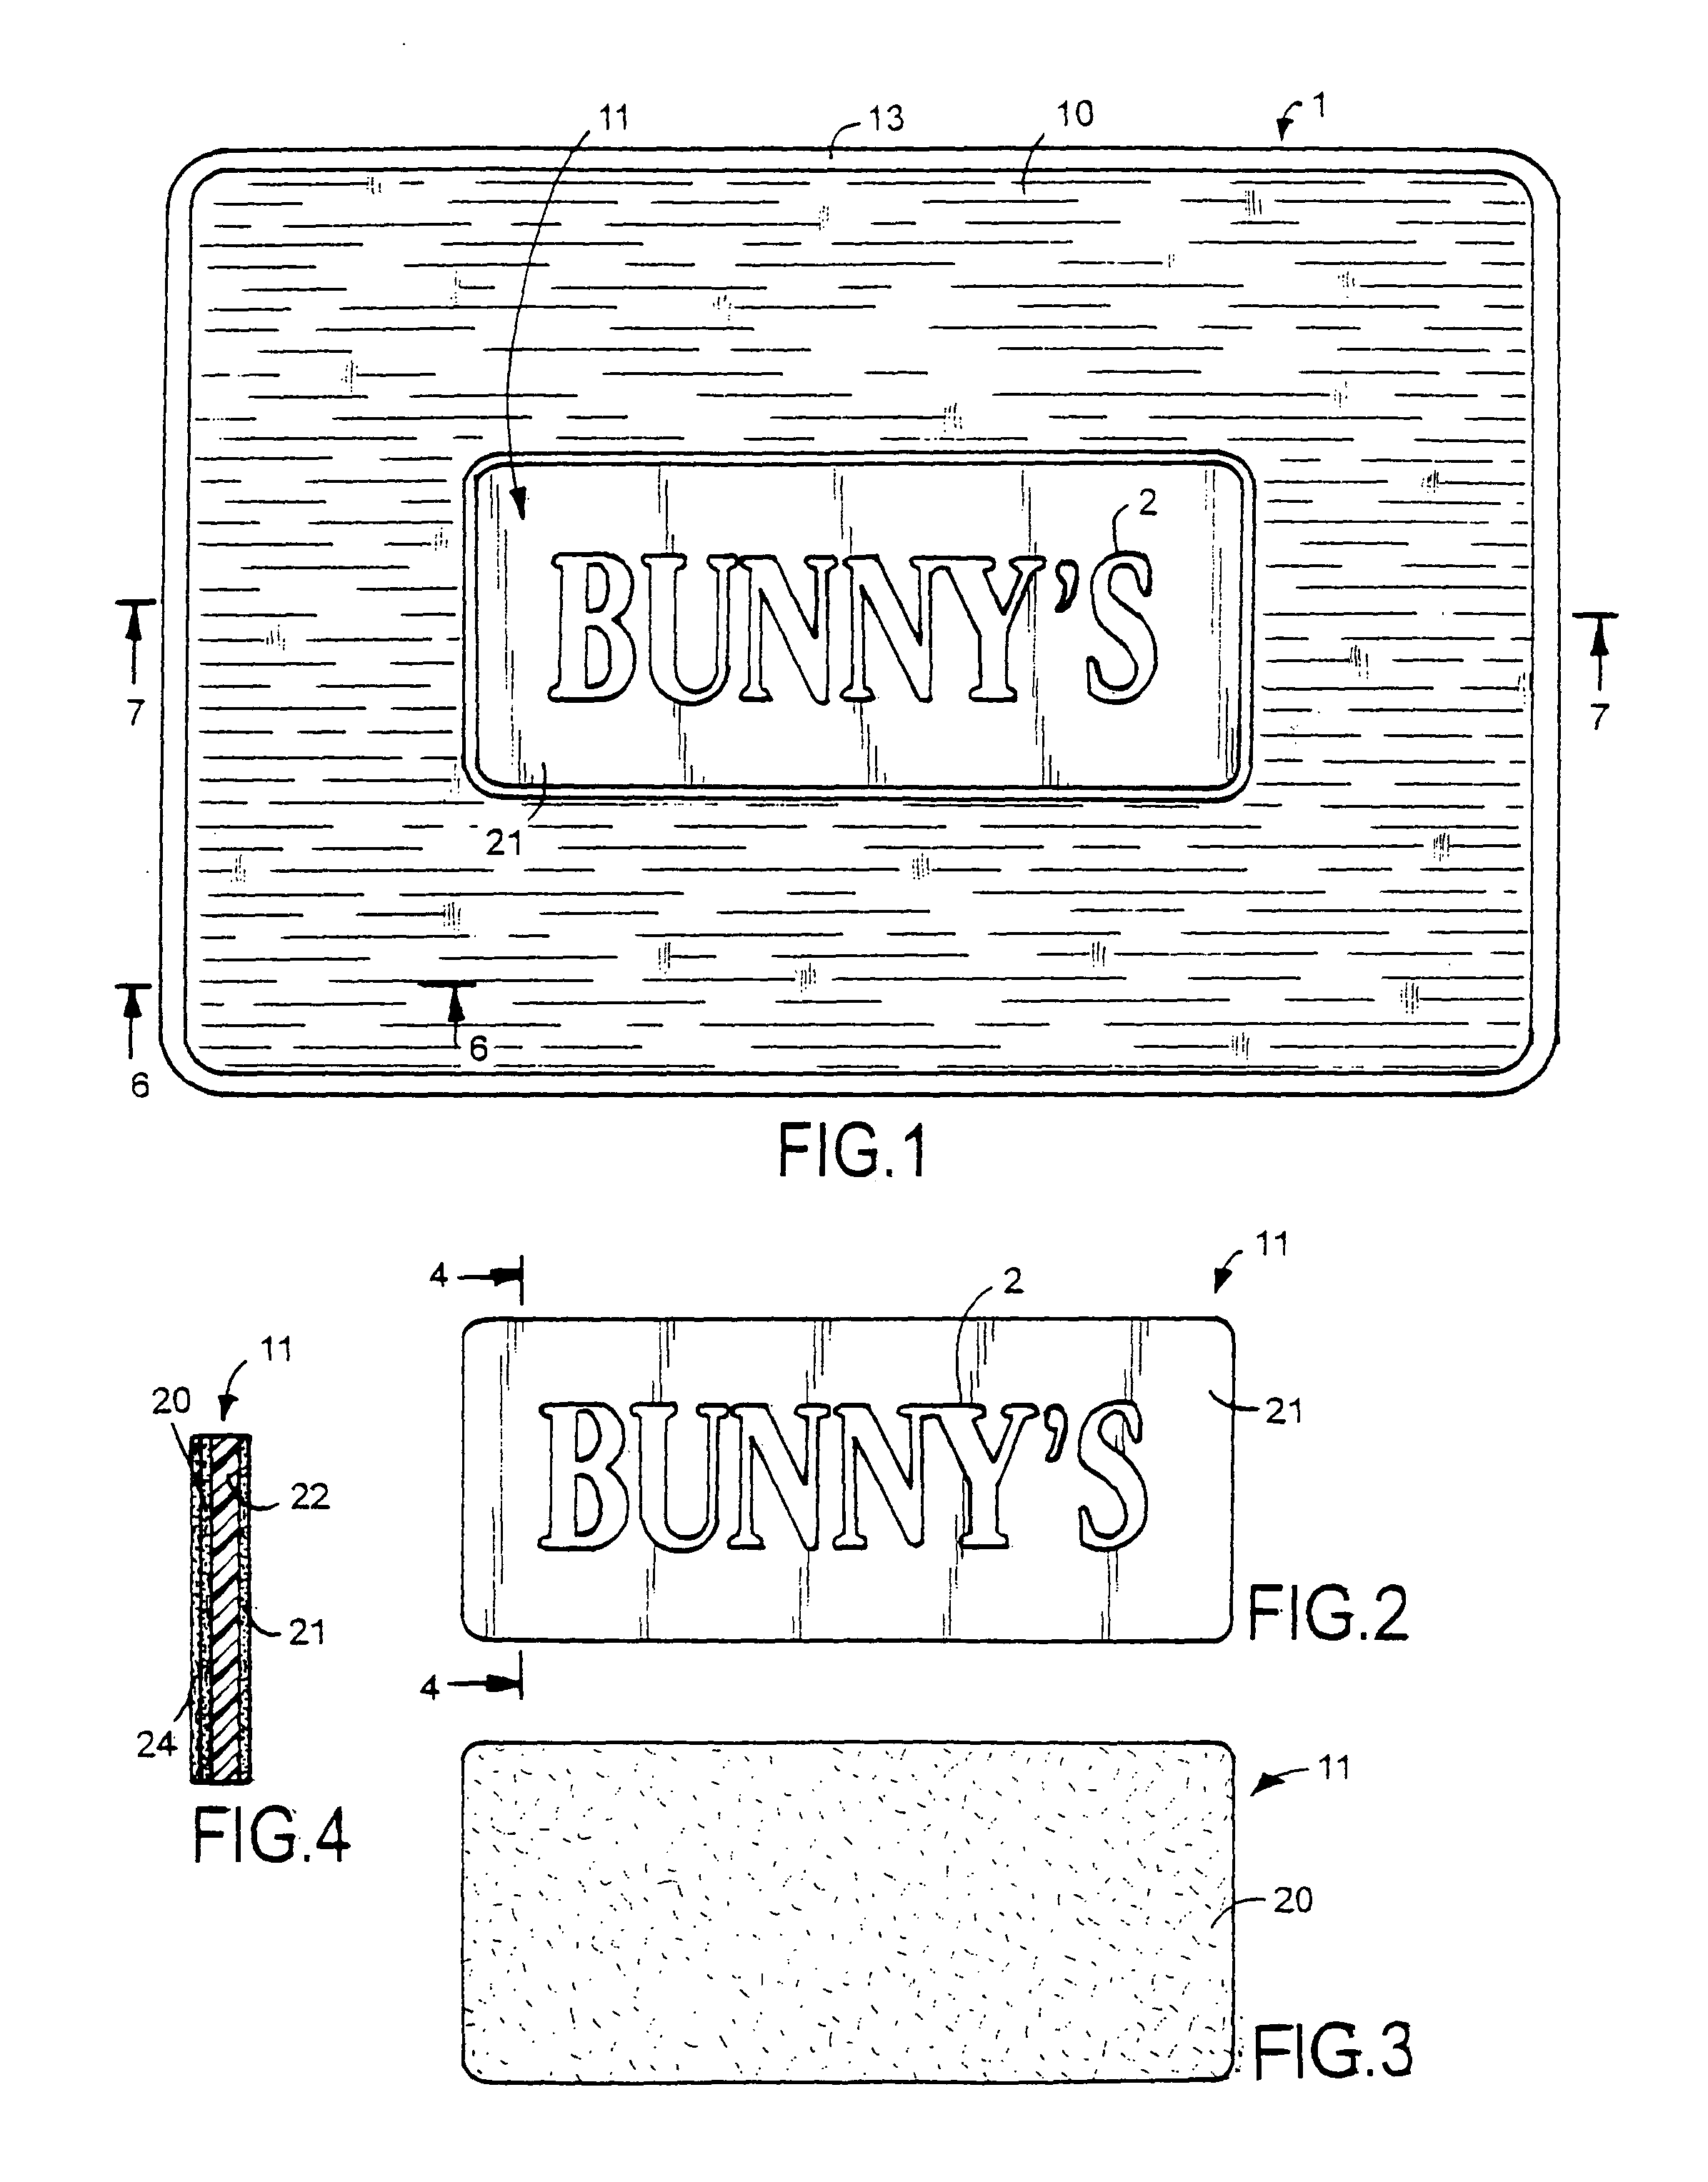 Graphic floor mat and method of making mat